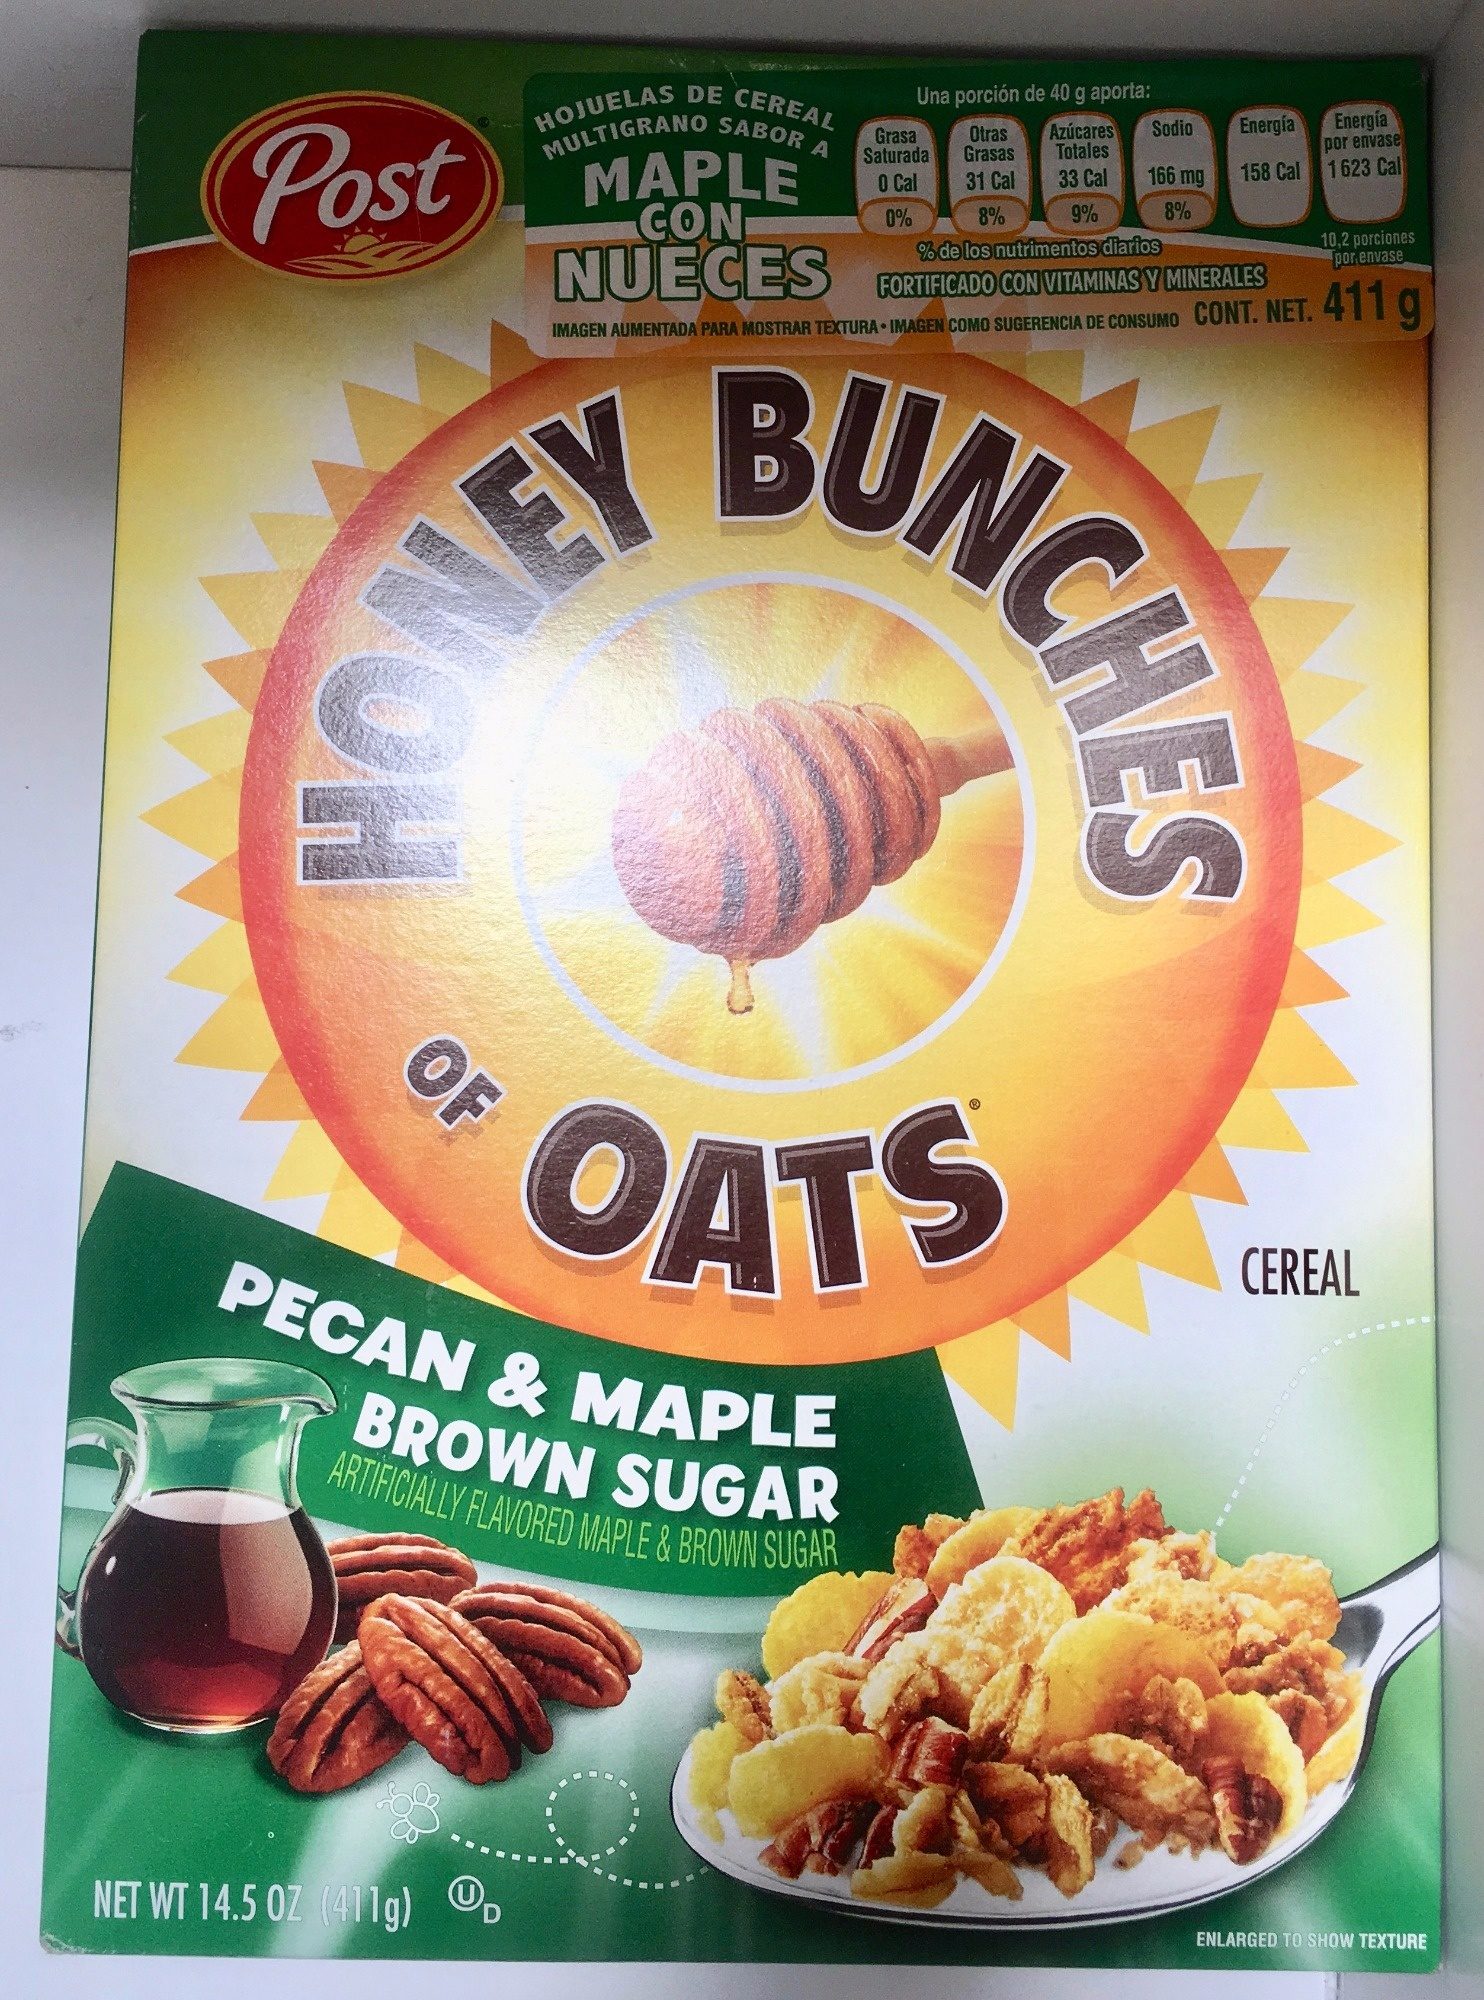 Honey bunches of oats pecan & maple brown sugar - Producto